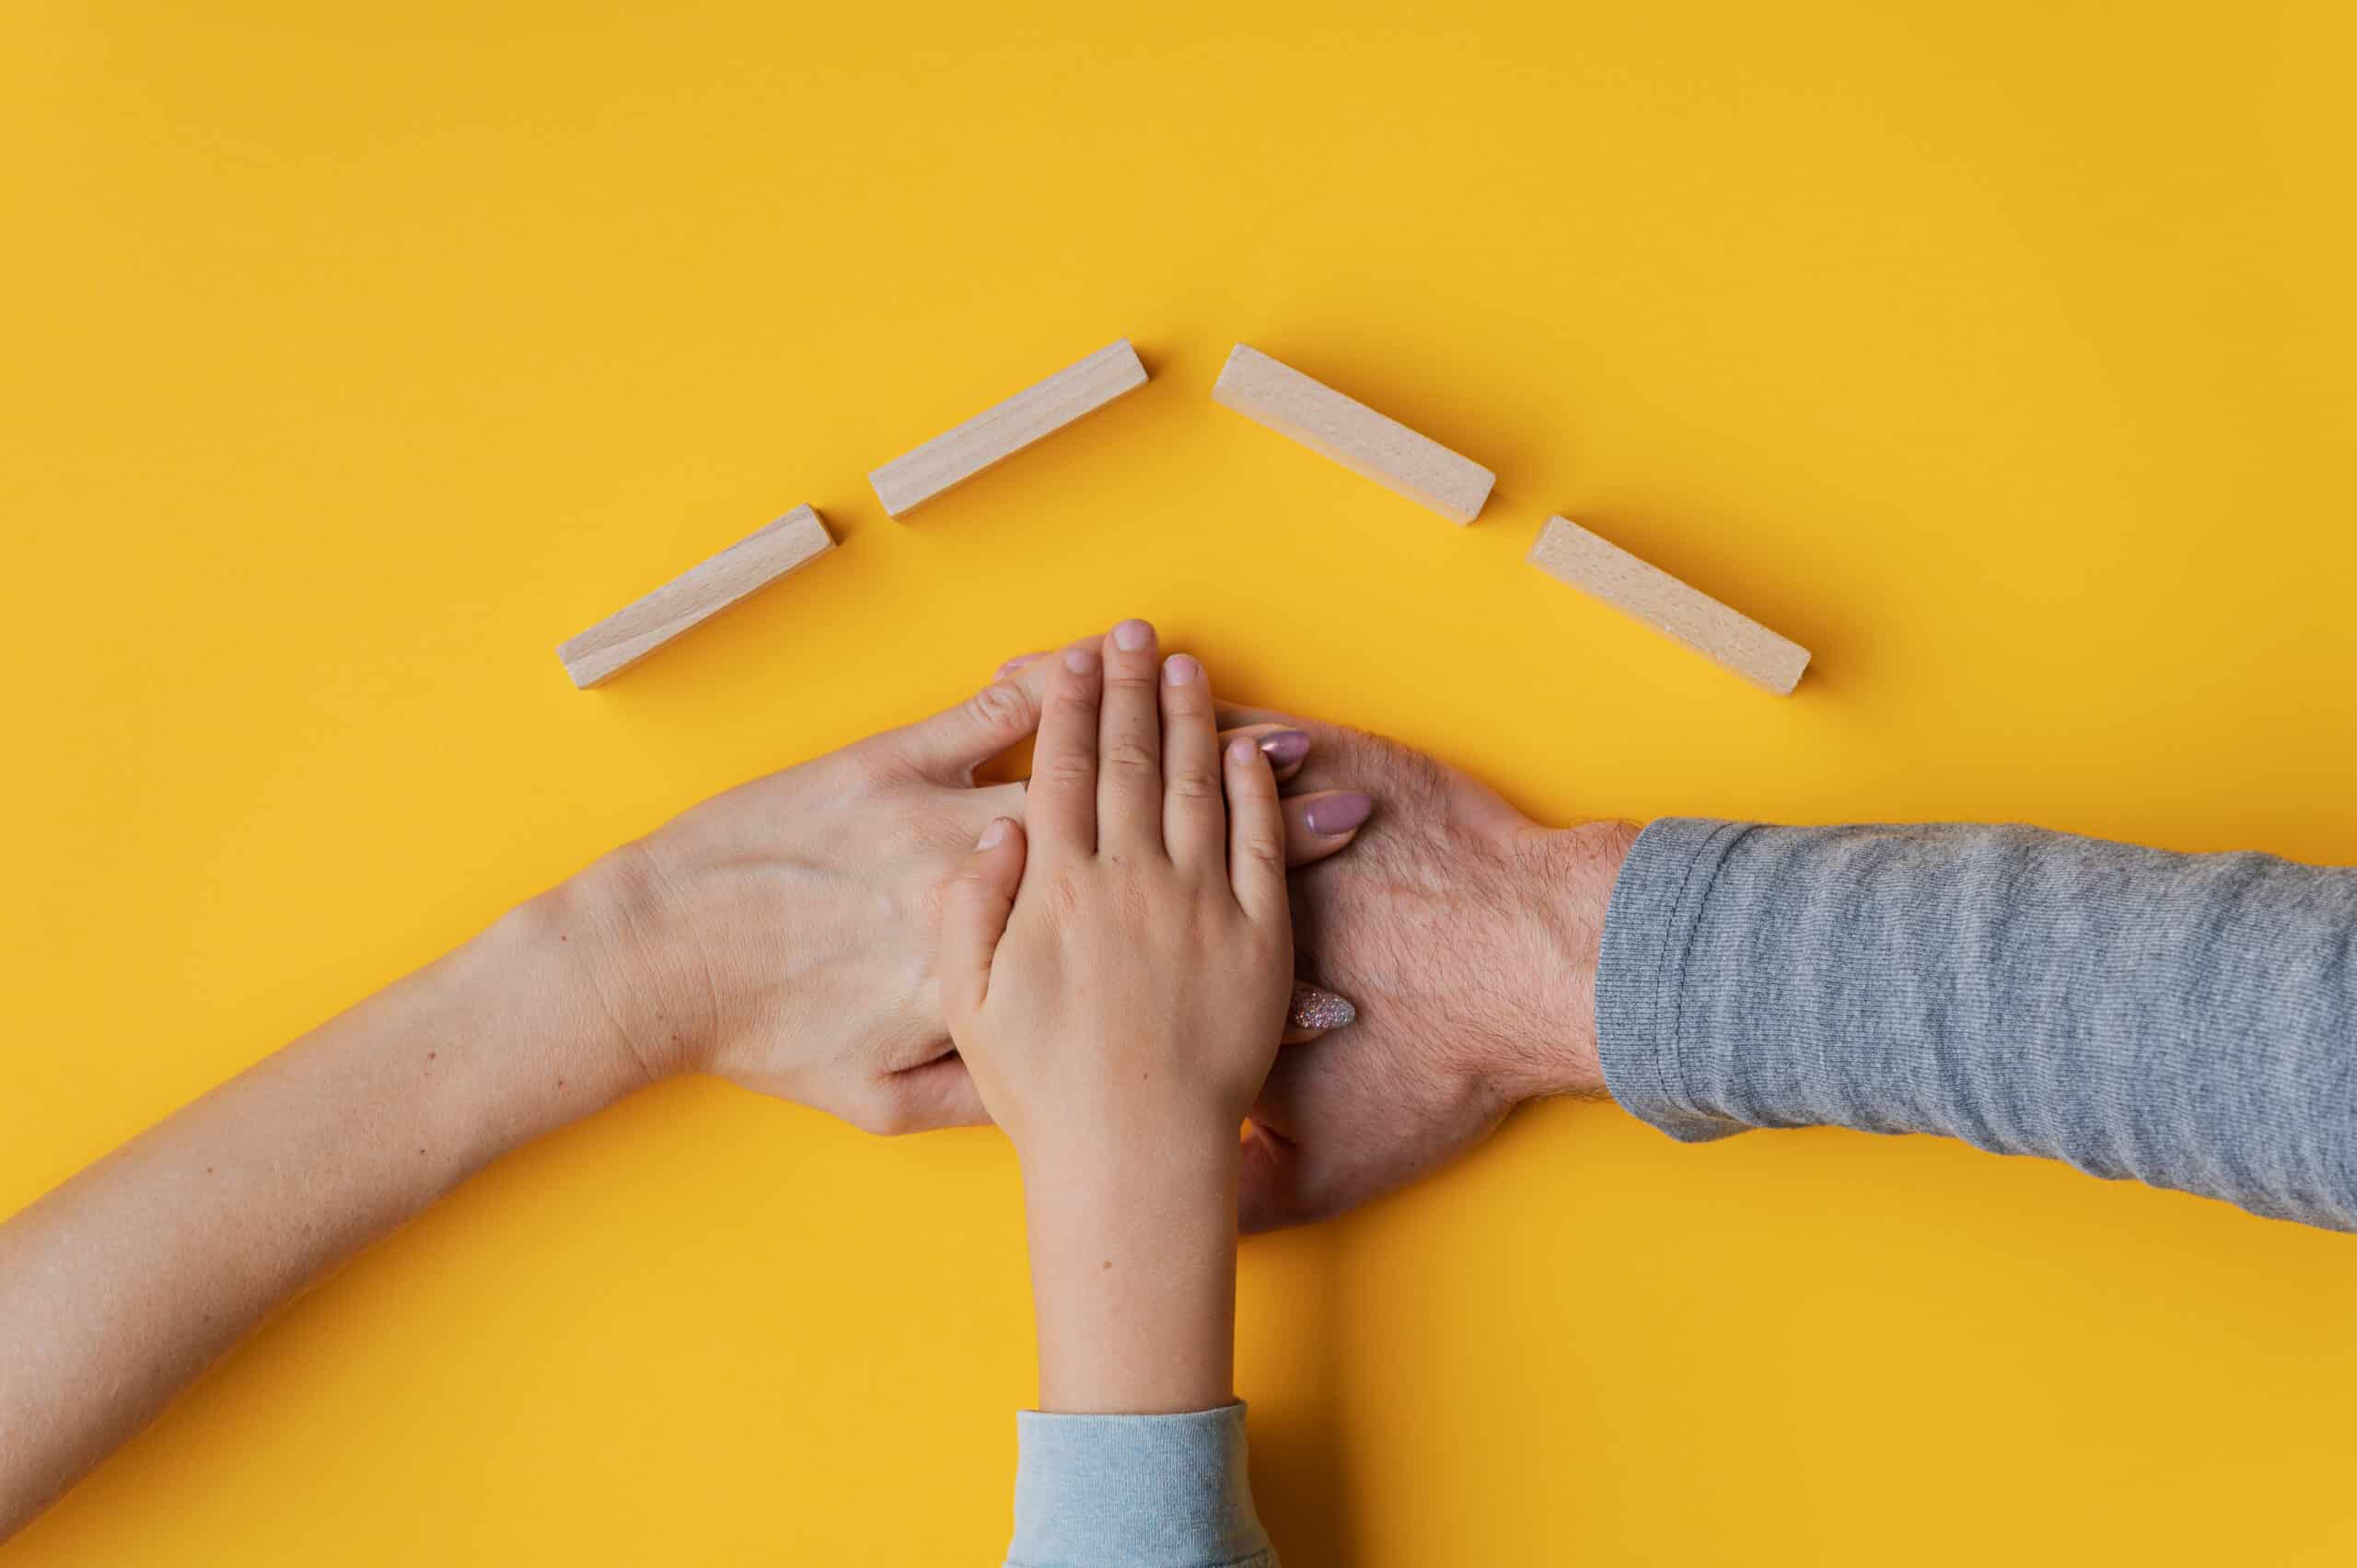 Family Stacking Their Hand On Yellow Background With Roof Made O